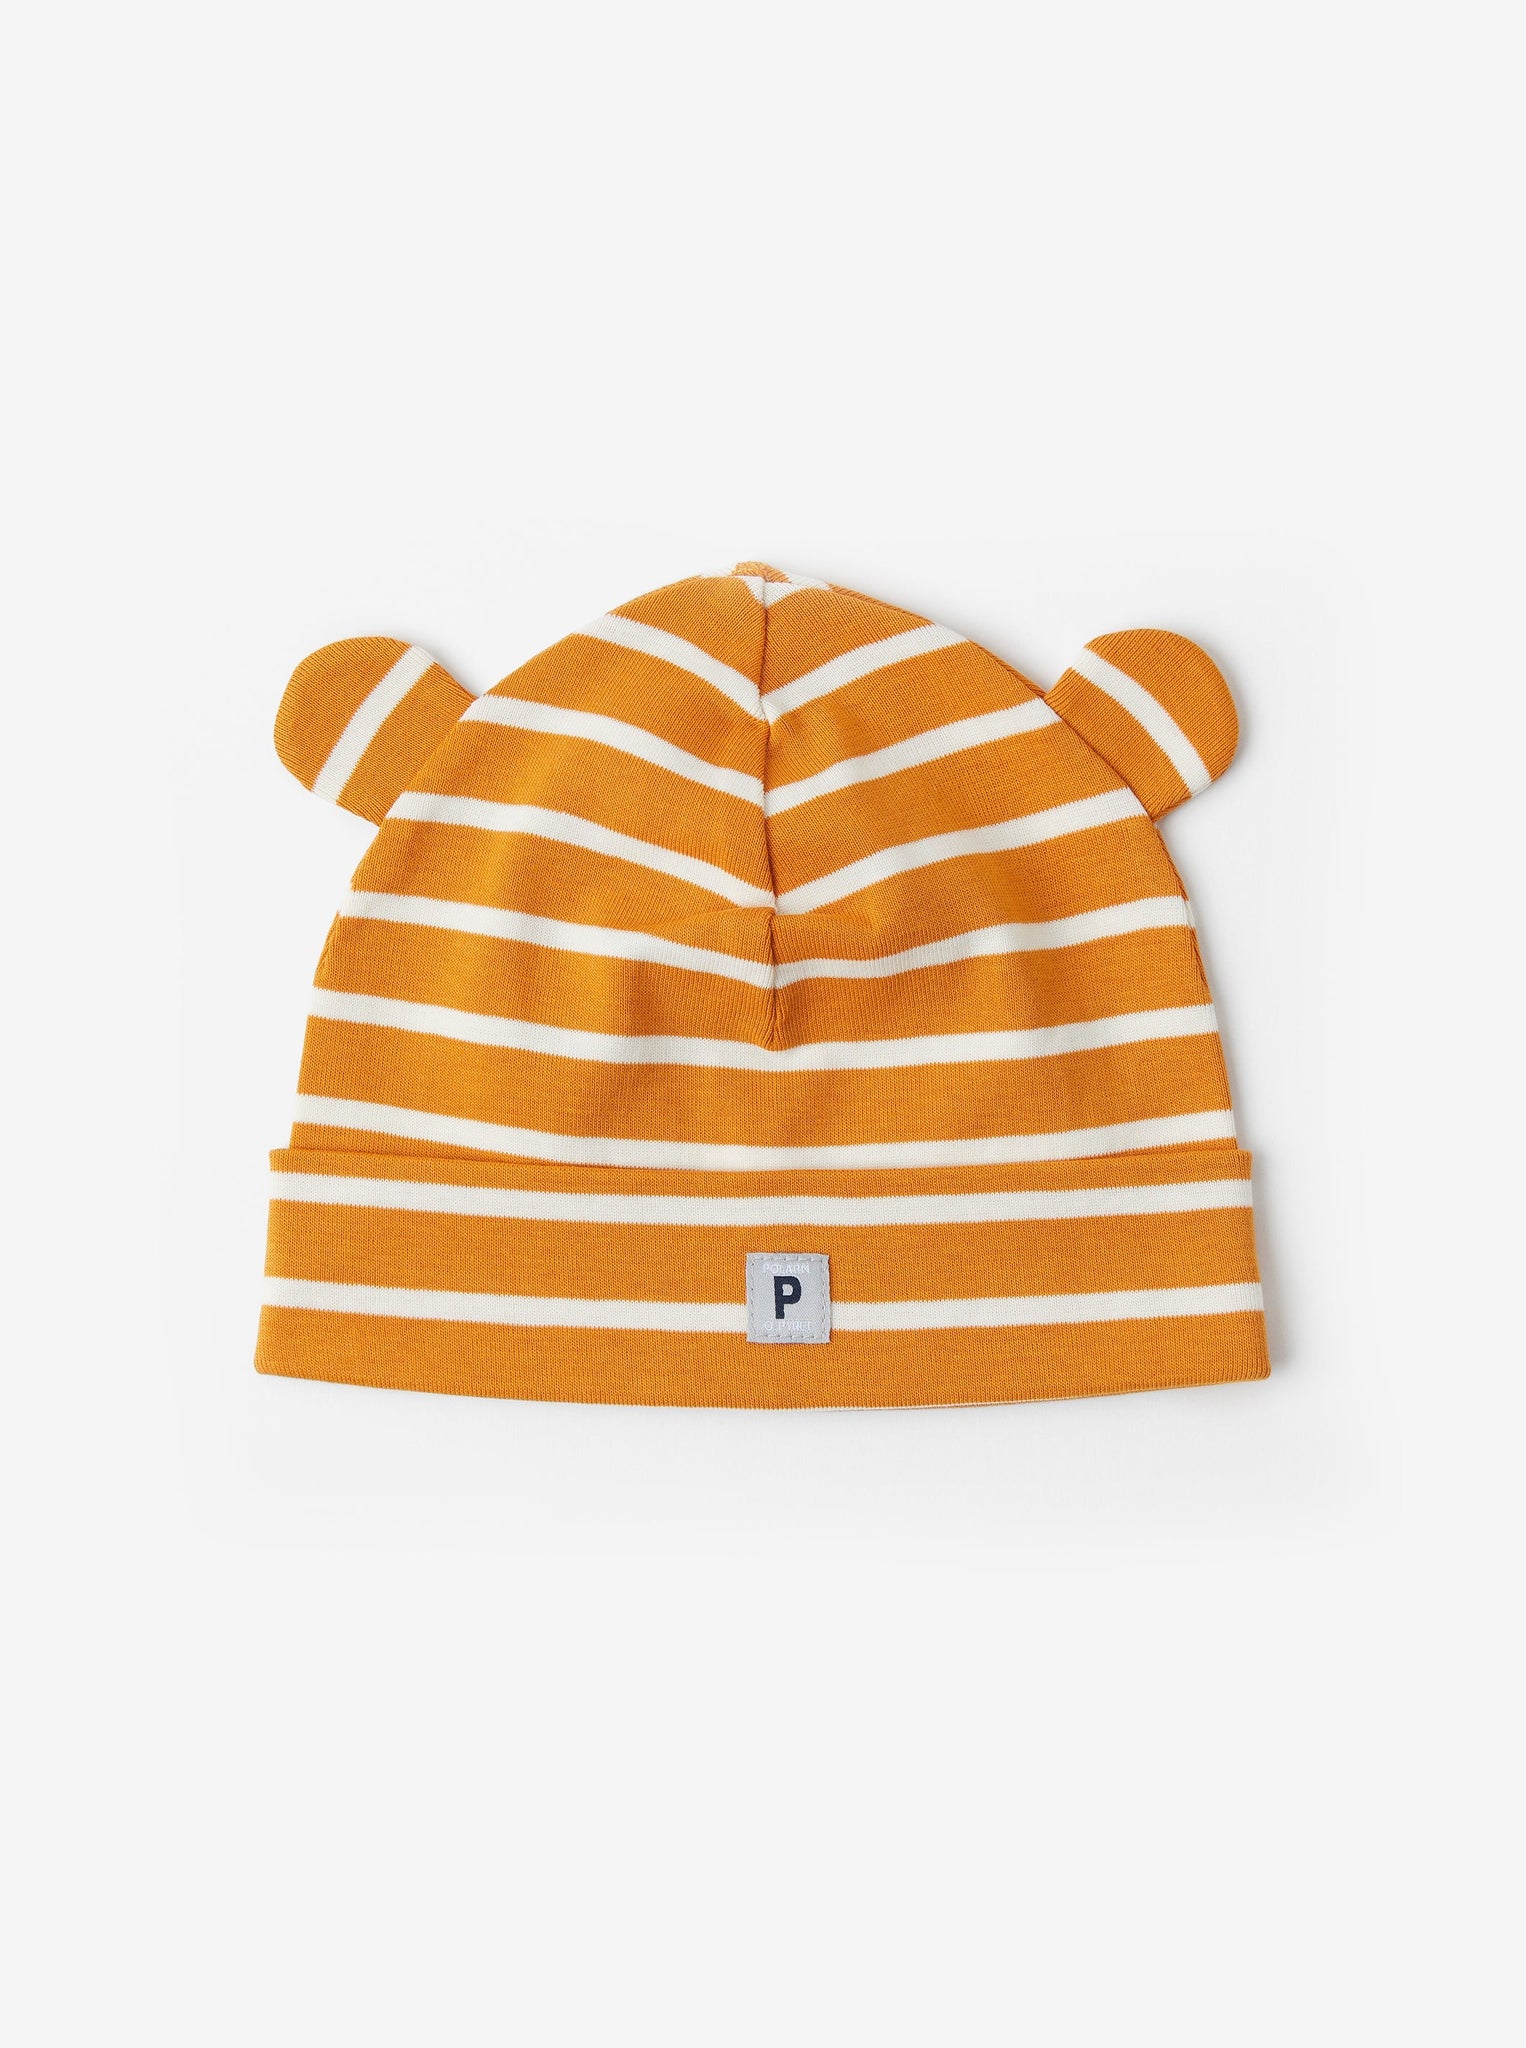 Organic Cotton Yellow Baby Beanie Hat from the Polarn O. Pyret Kidswear collection. Clothes made using sustainably sourced materials.